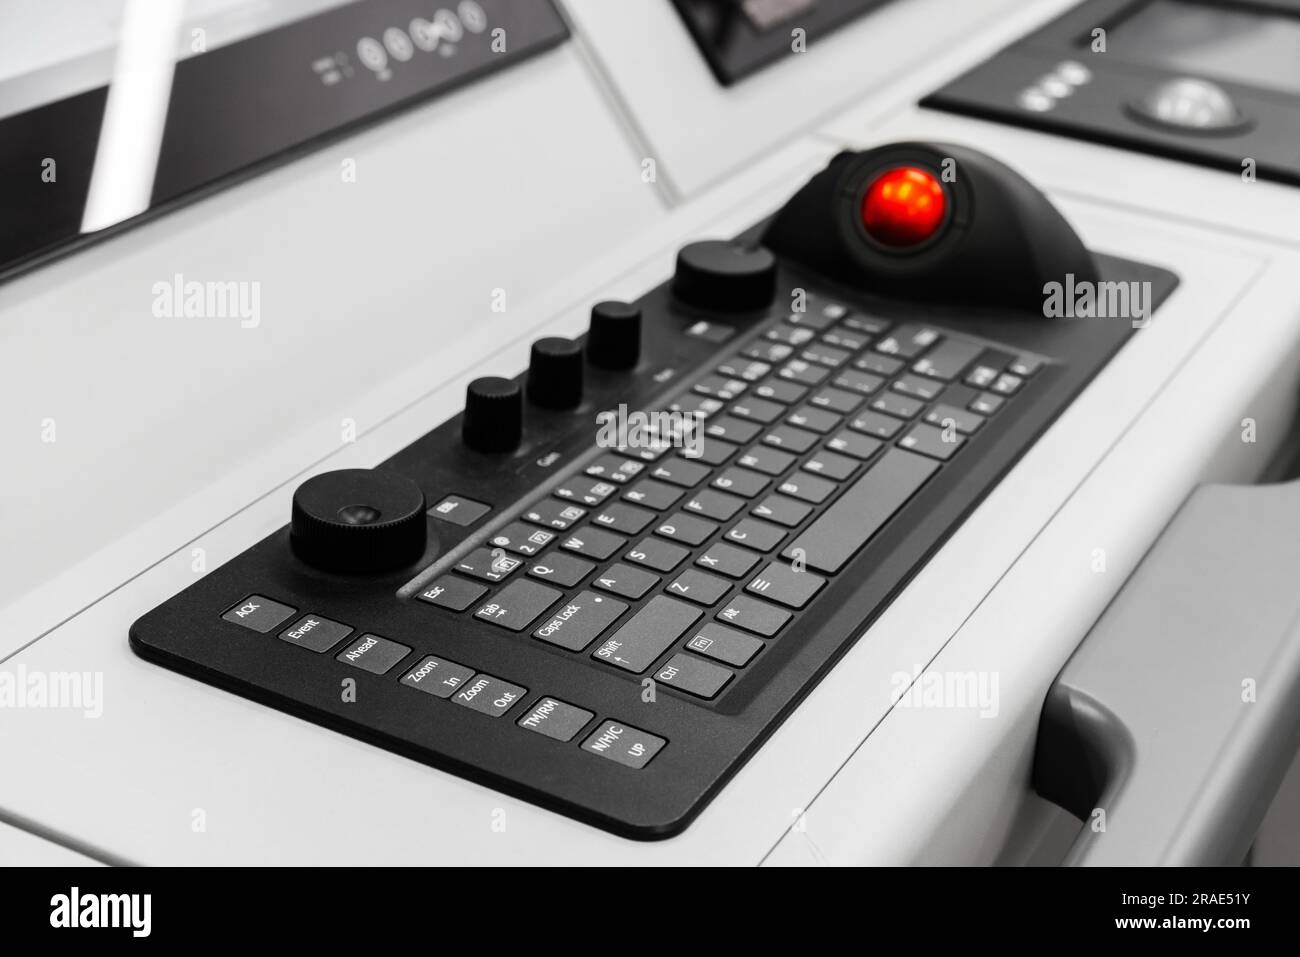 Built-in tabletop input device, industrial keyboard with trackball mouse, modern navigation equipment mounted on a captains bridge Stock Photo